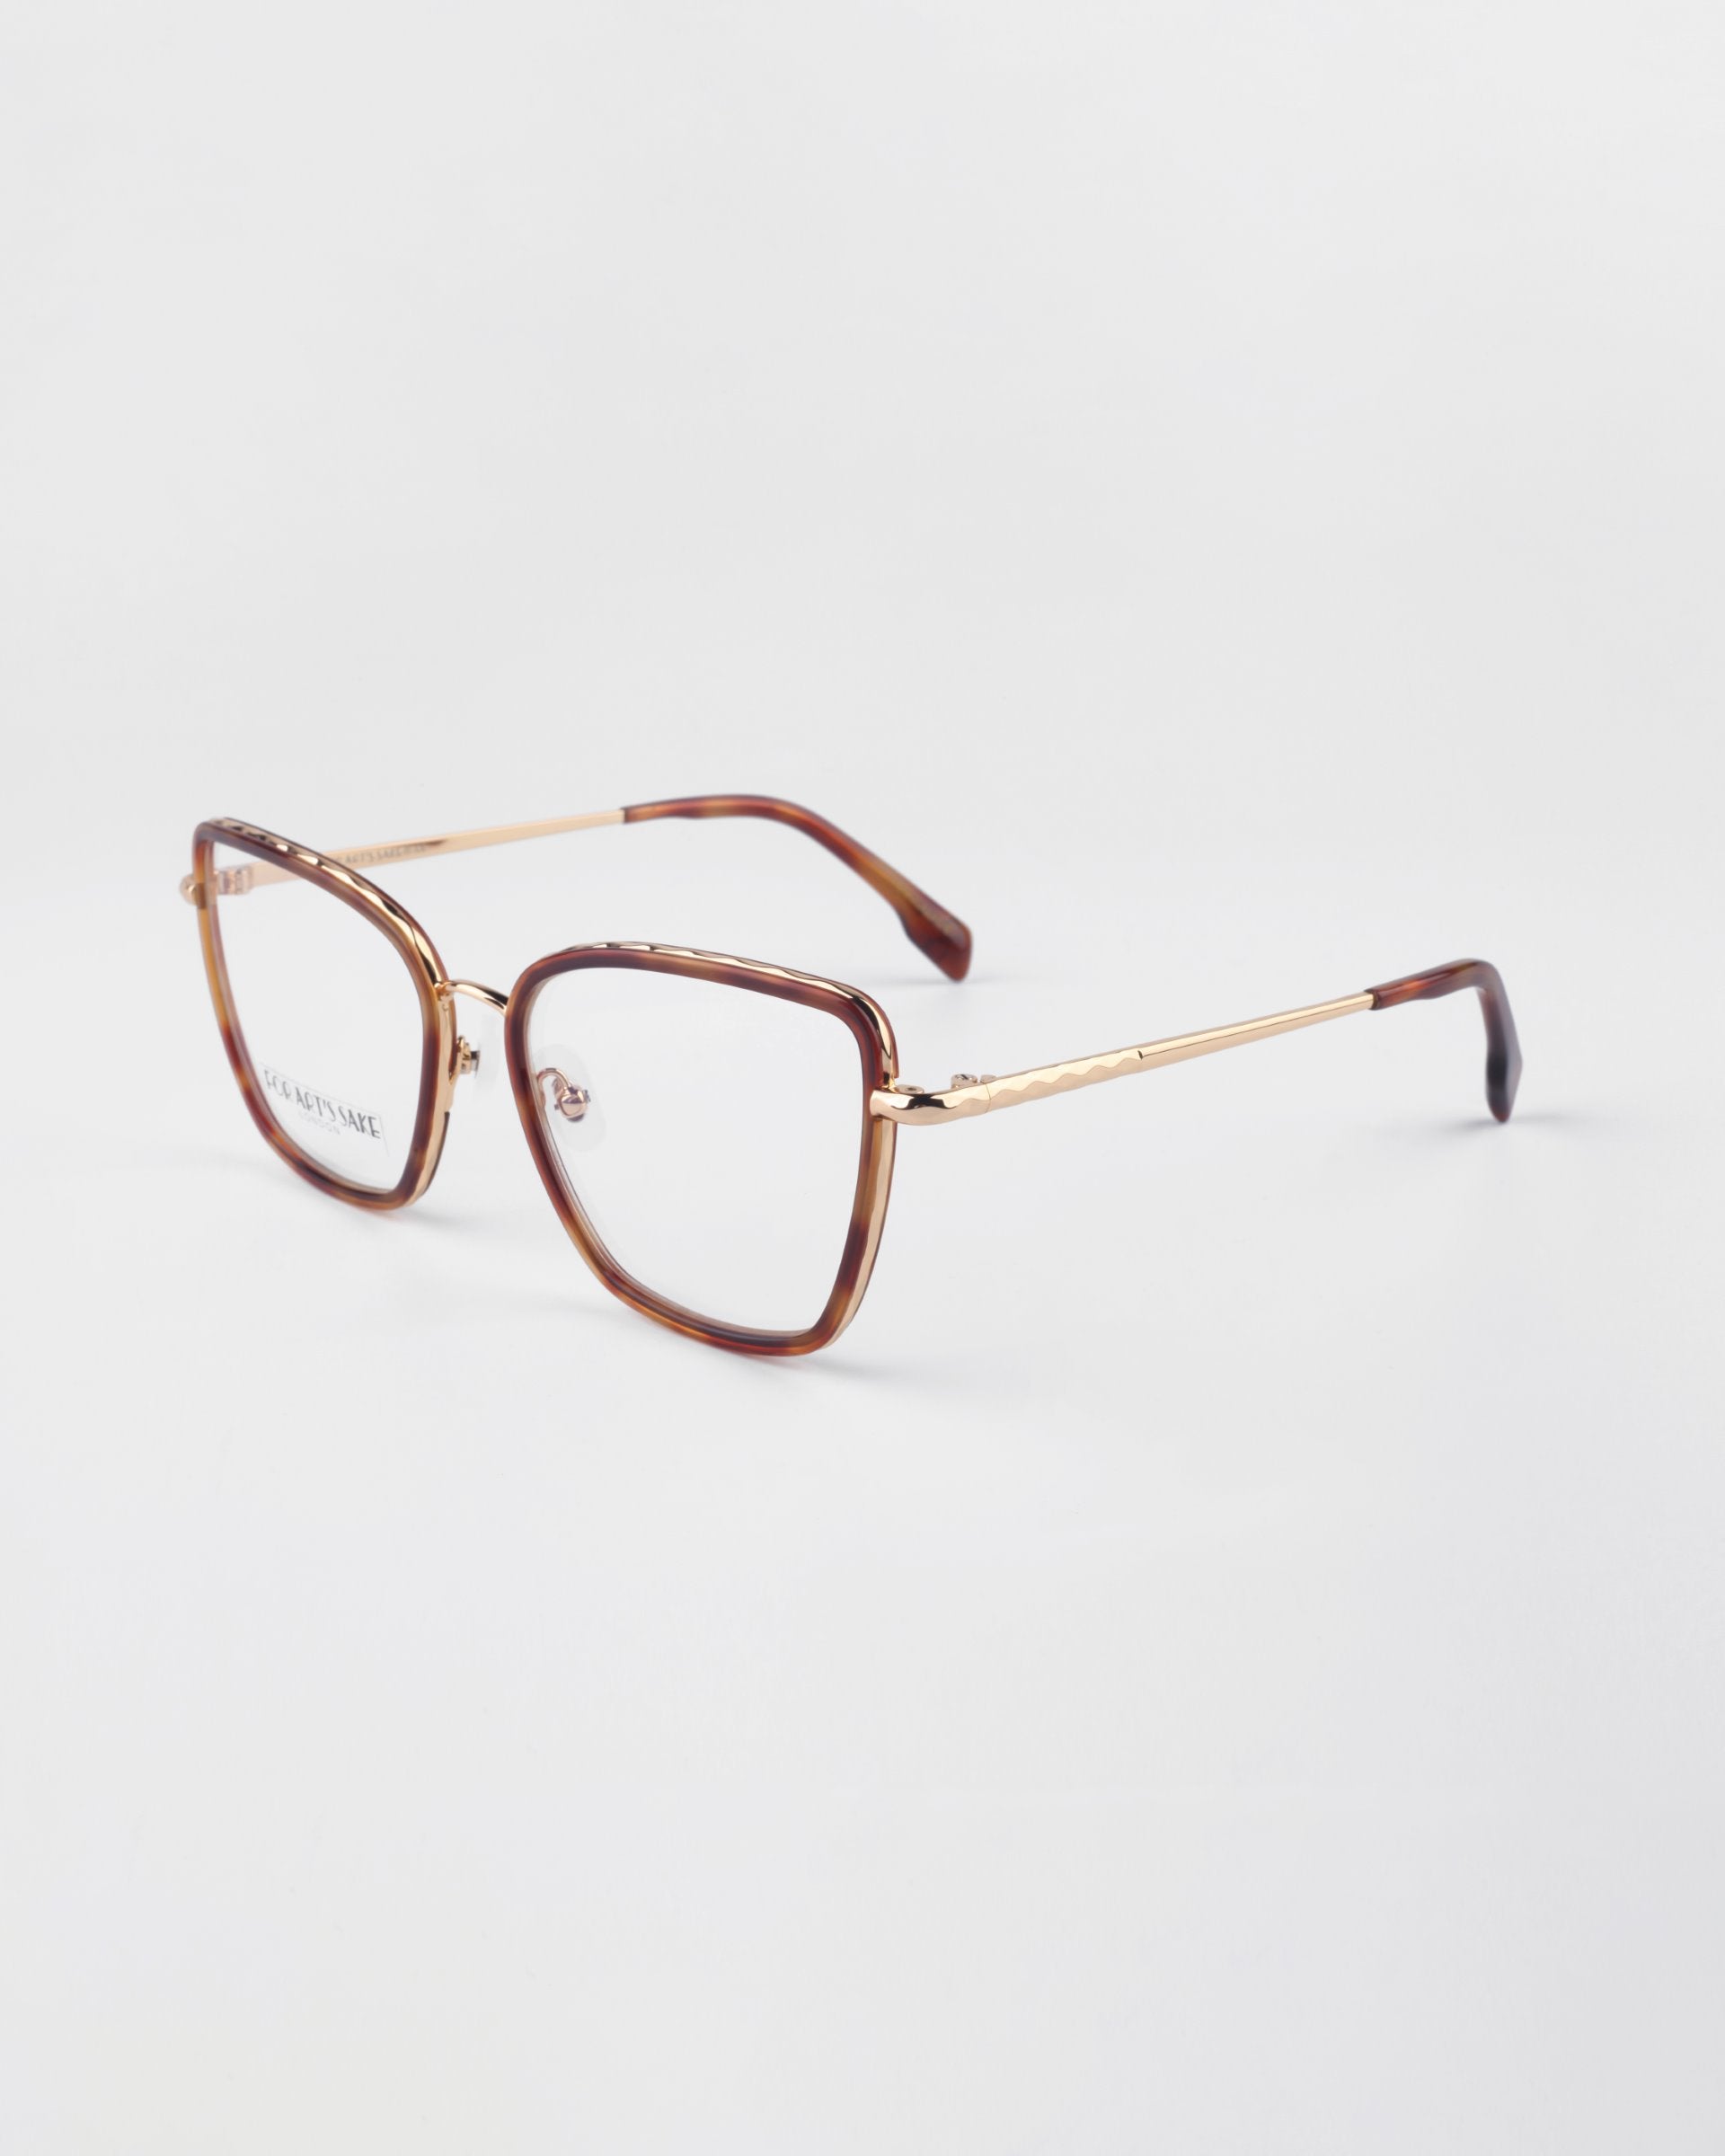 A pair of eyeglasses with a brown square frame and gold-toned temples. The design features a sleek and modern look, enhanced by prescription lenses, and they are positioned on a plain white background. This is the Lace by For Art&#39;s Sake®.